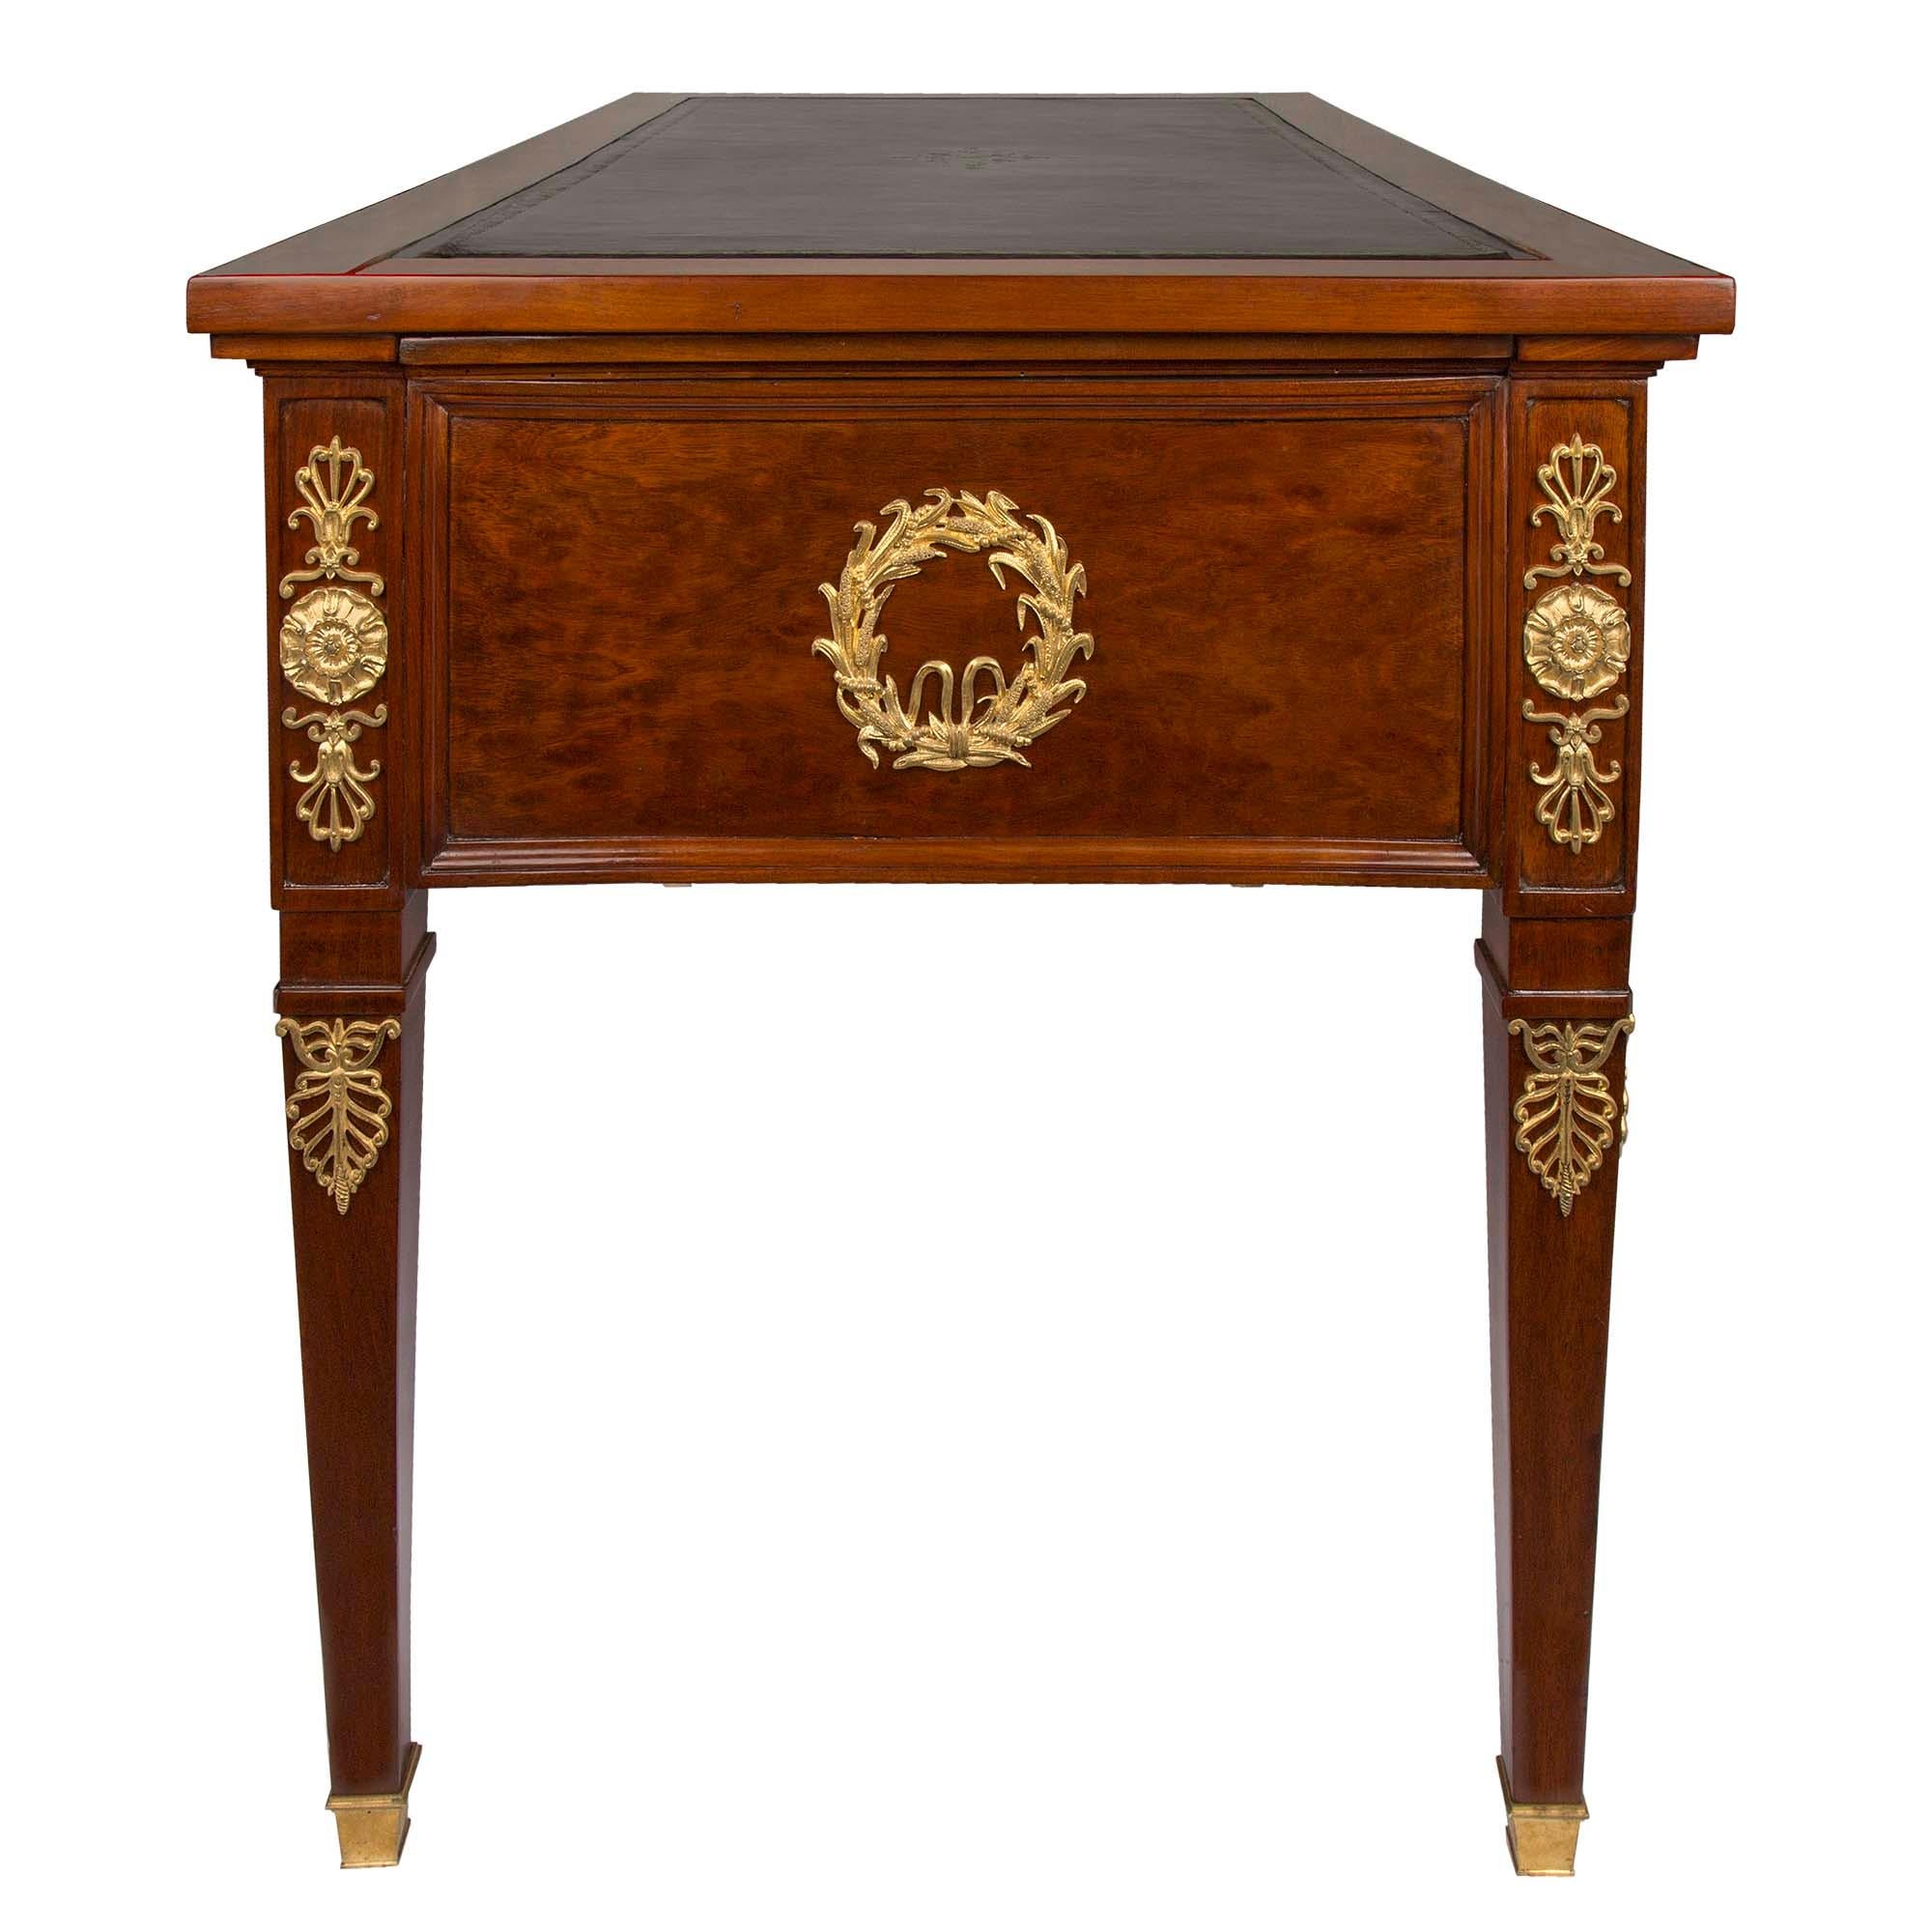 French 19th Century Empire Style Mahogany and Ormolu Bureau Plat For Sale 1